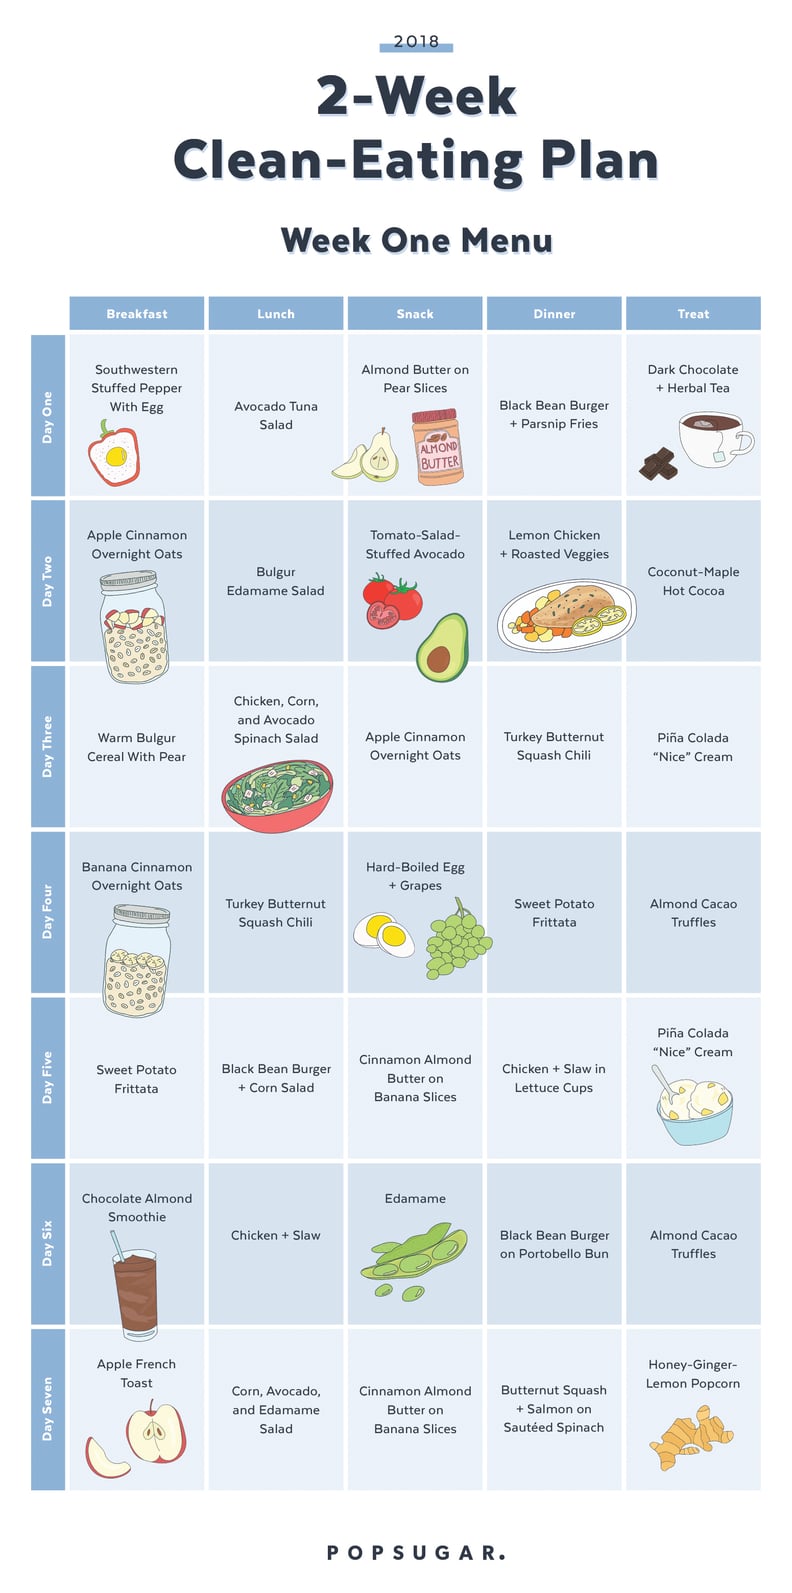 Take a Look at the First Week of Meals